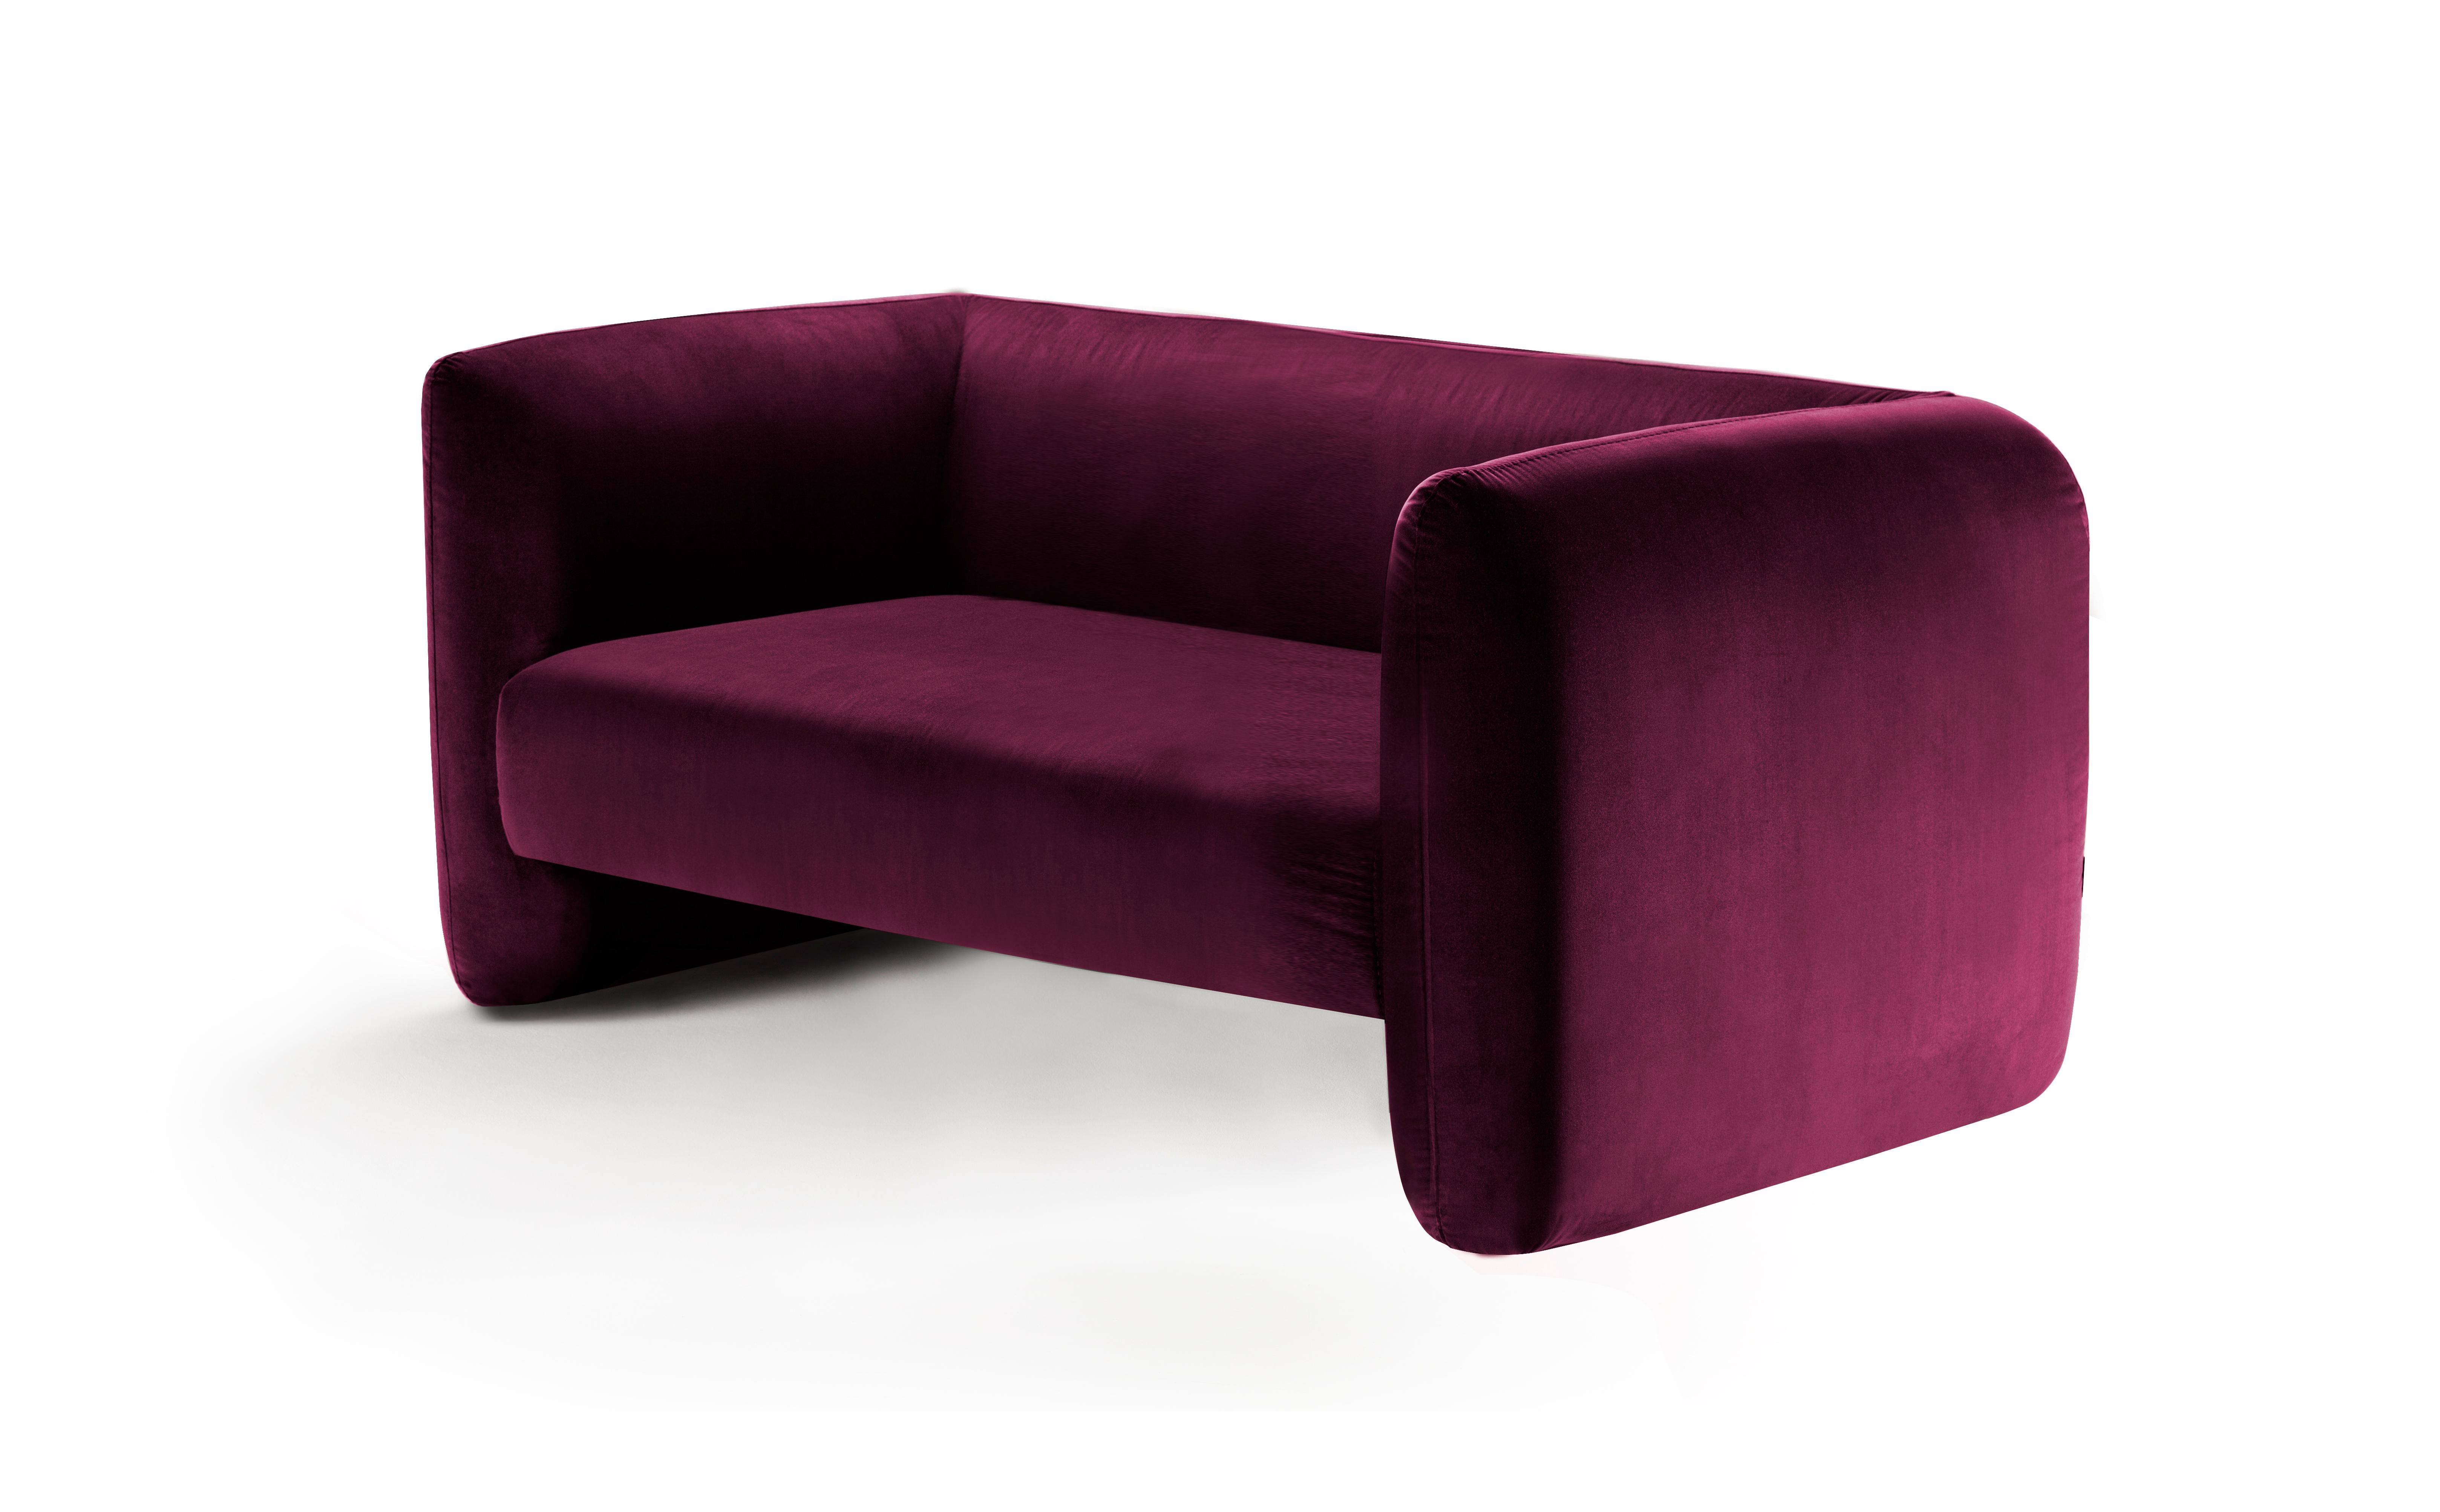 Contemporary Modern Collector Studio Jacob Sofa in Syrah Velvet by Collector

This fun and sophisticated 21st century sofa designed by Collector Studio, it’s simple shape and attractive color game along with other possible combinations of materials